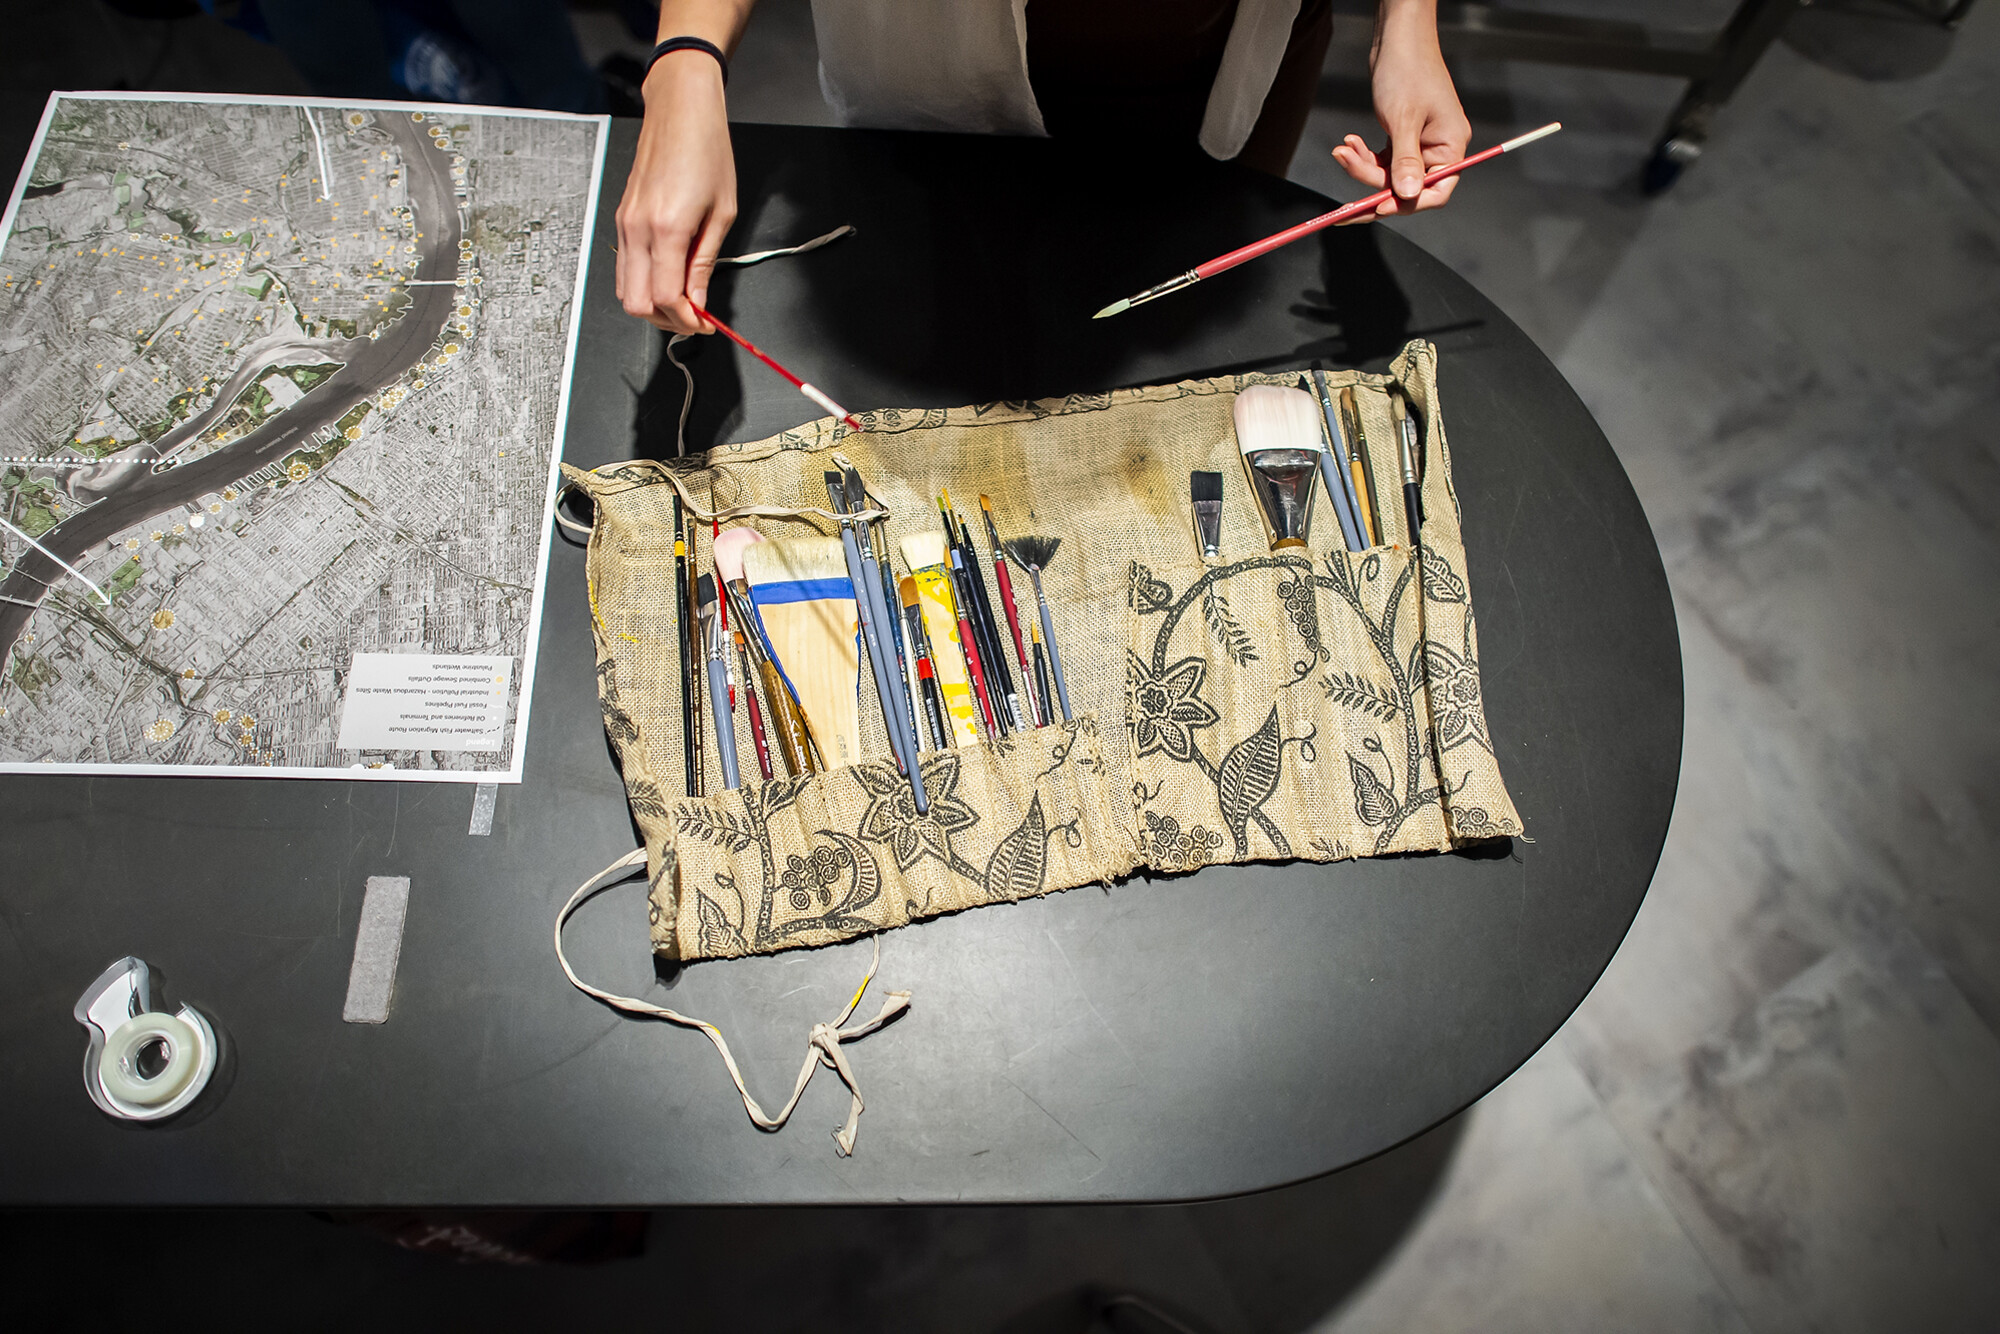 Overhead view of paintbrushes in a fabric kit and a satellite map.